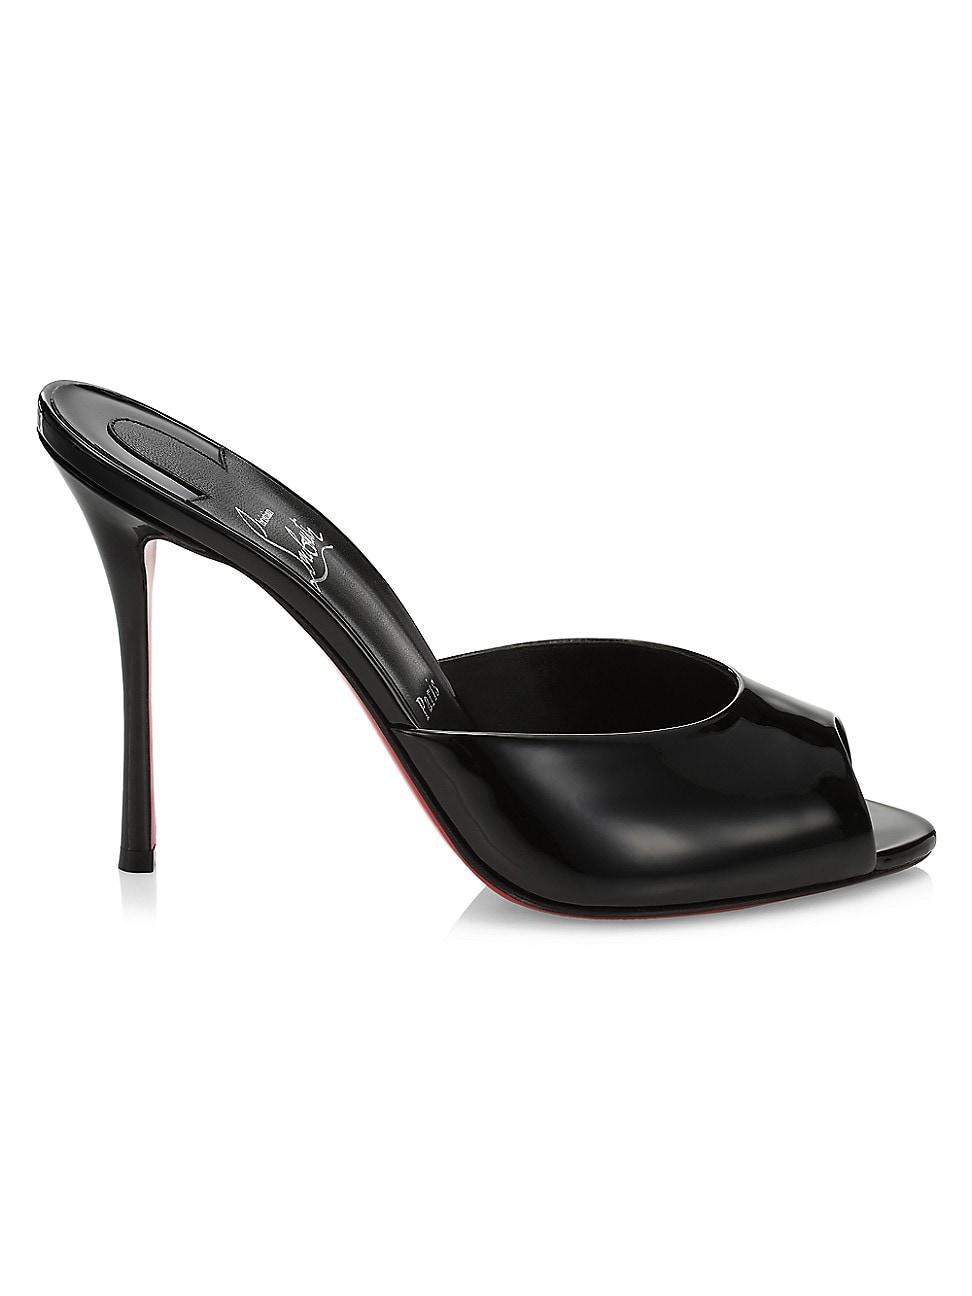 Christian Louboutin Me Dolly 100 Patent Leather Mules in Black | Lyst